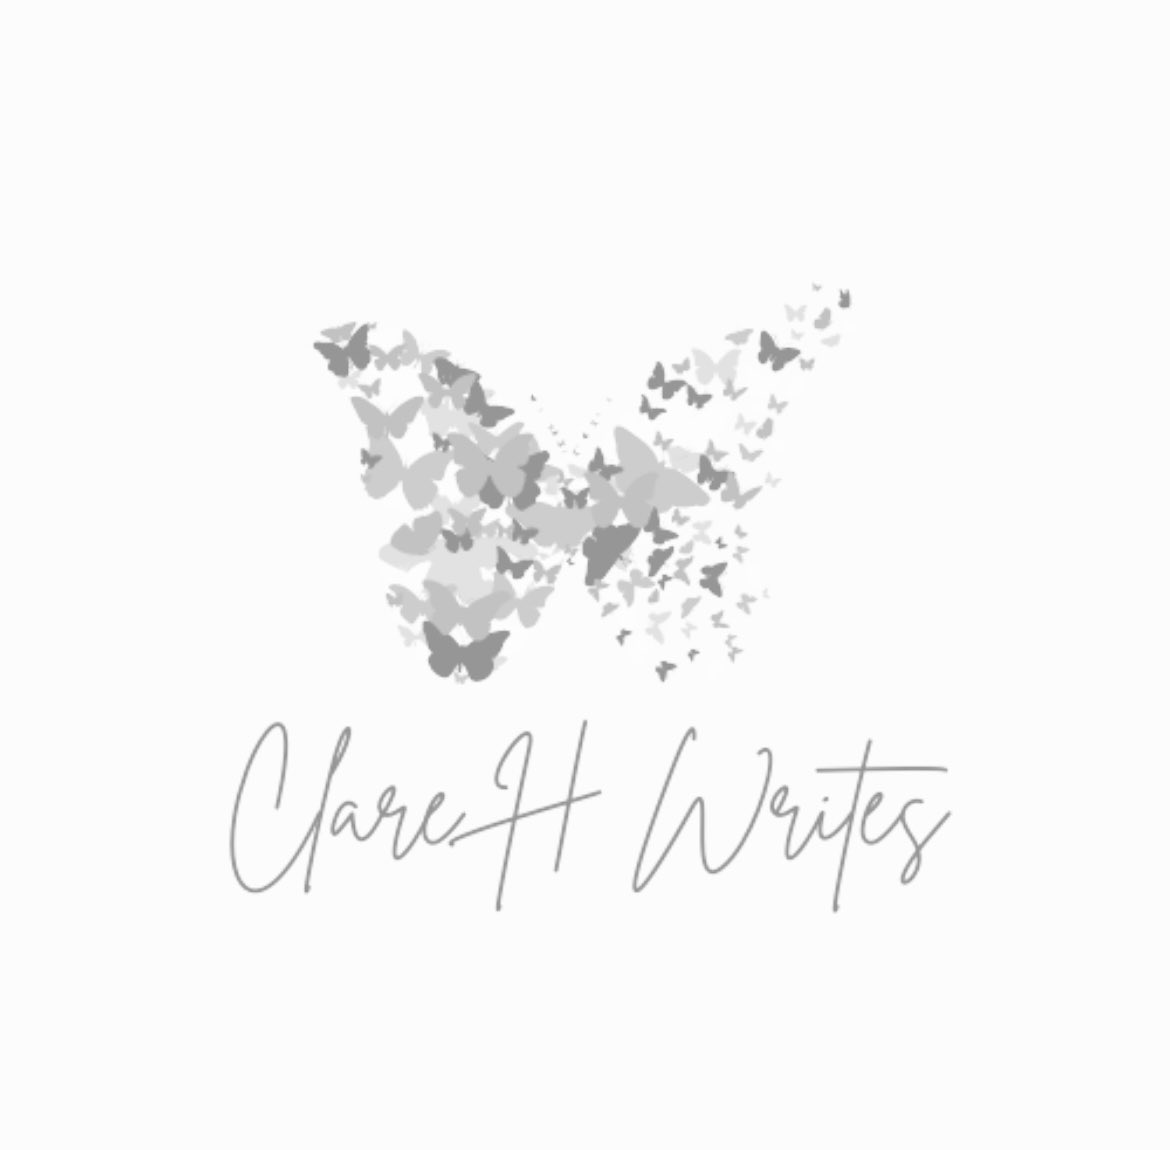 Please share my website, clarehwrites.co.uk, and page @clarehwrites, because honestly, I would like to take myself and my long-suffering husband on holiday; I think we both deserve it! 🥰 #SmallBusinessSupport #CopywritingServices #BusinessSupport #BusinessServices